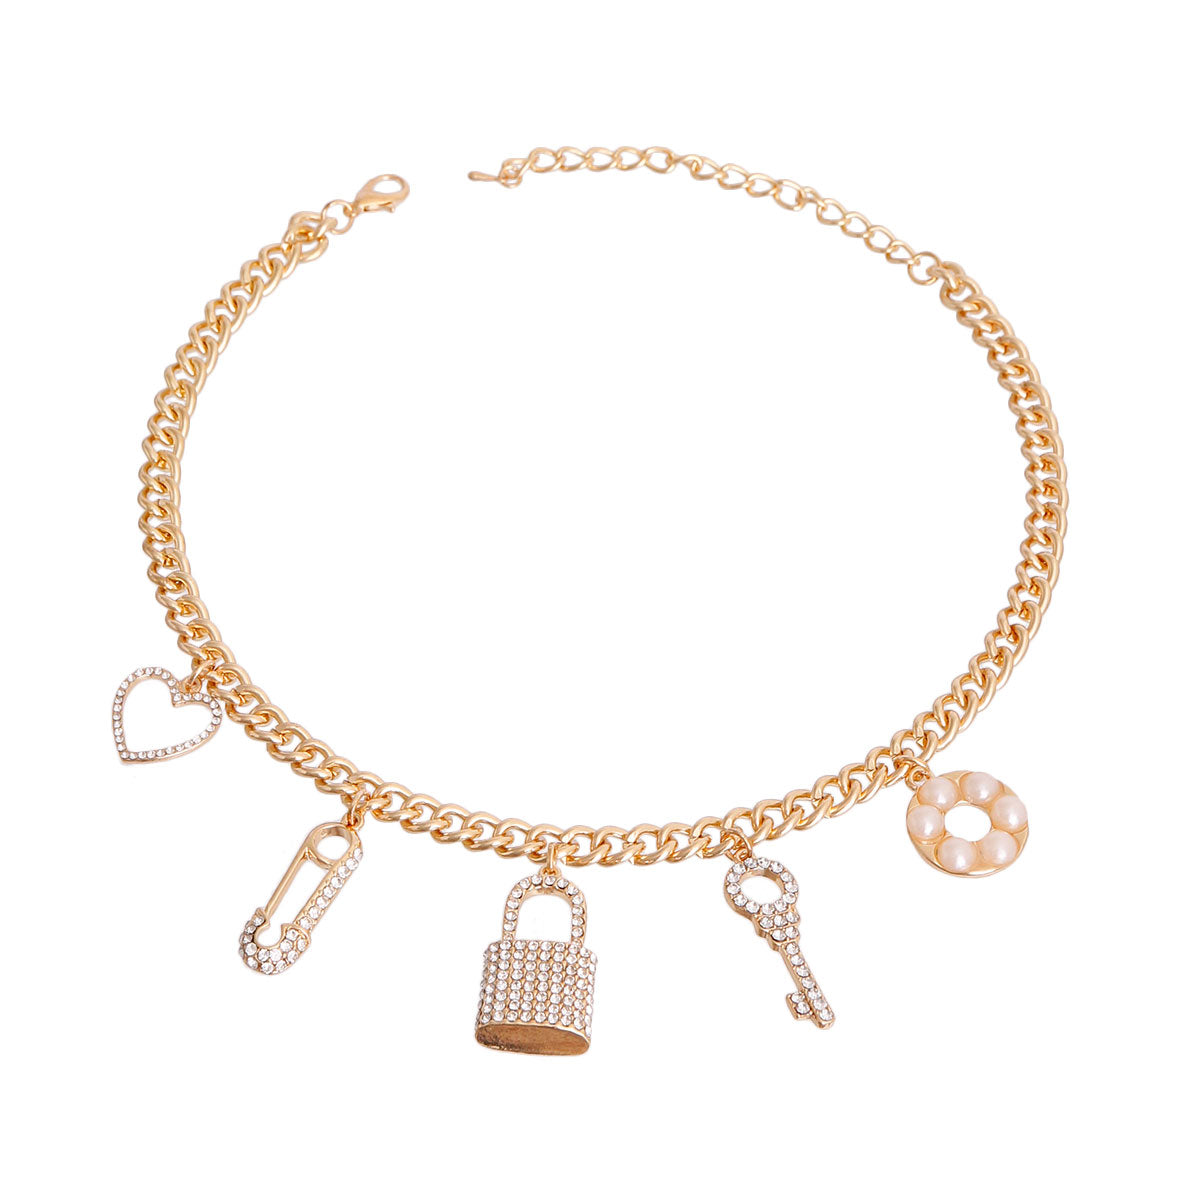 Gold Love Lock Charm Necklace